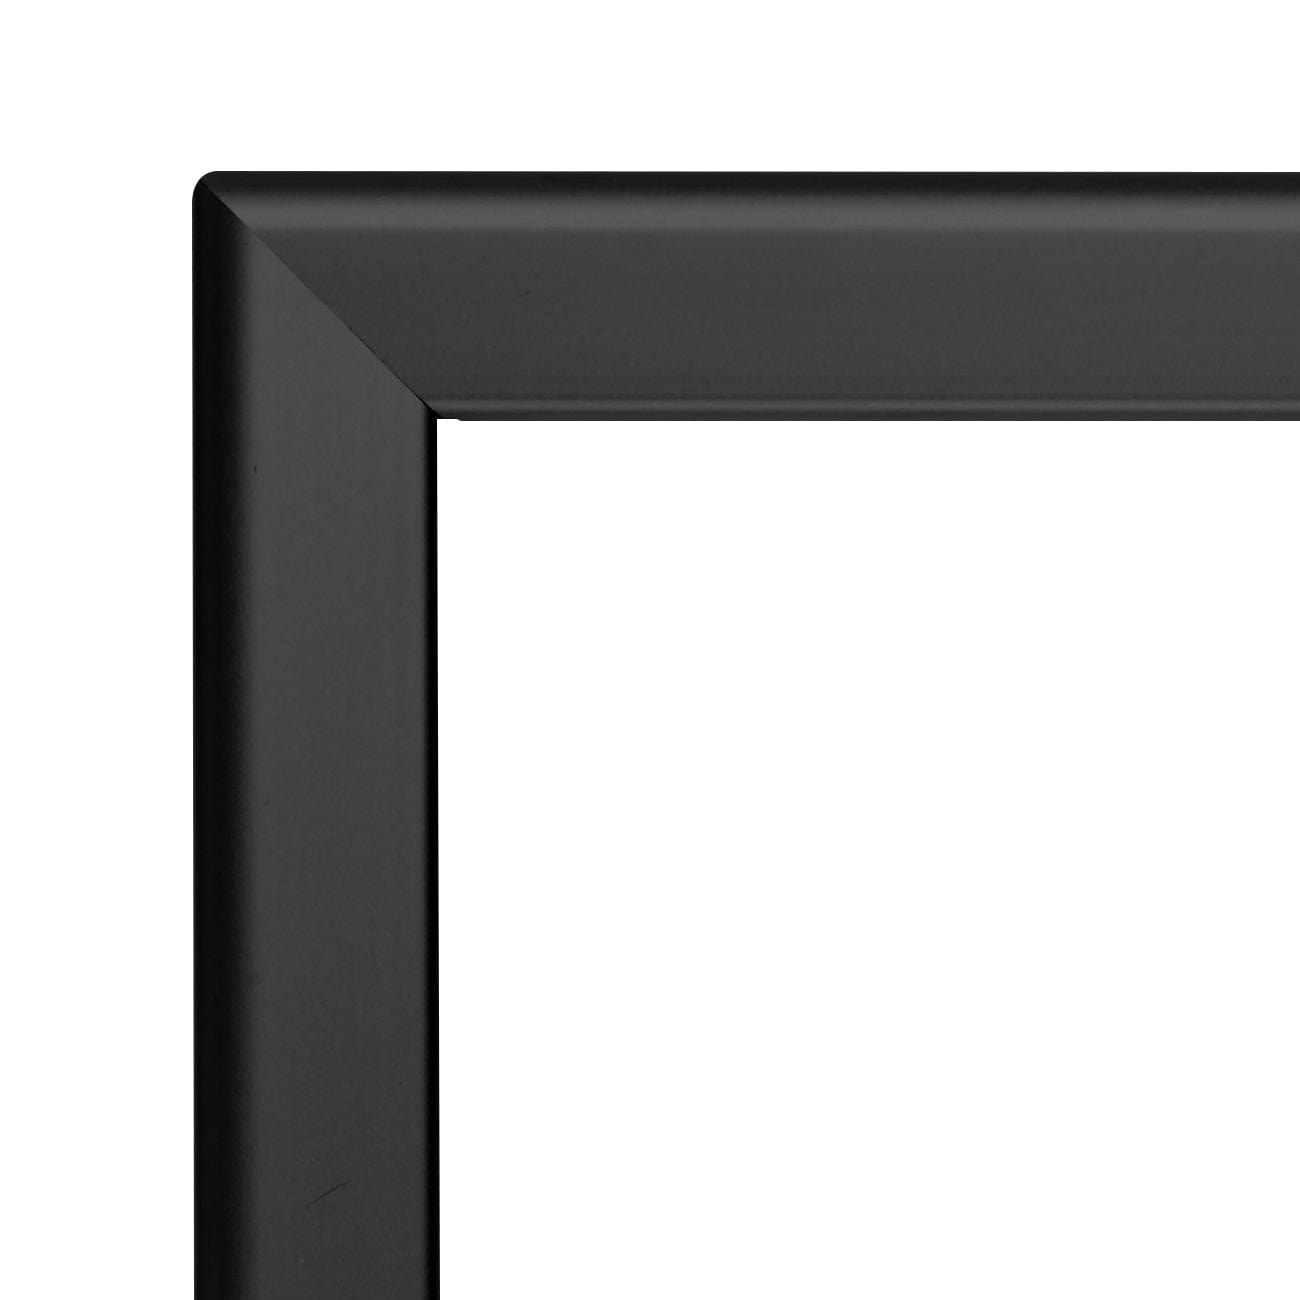 8.5x11 Inches Black Snap Frame - 1.25" Profile - Snap Frames Direct